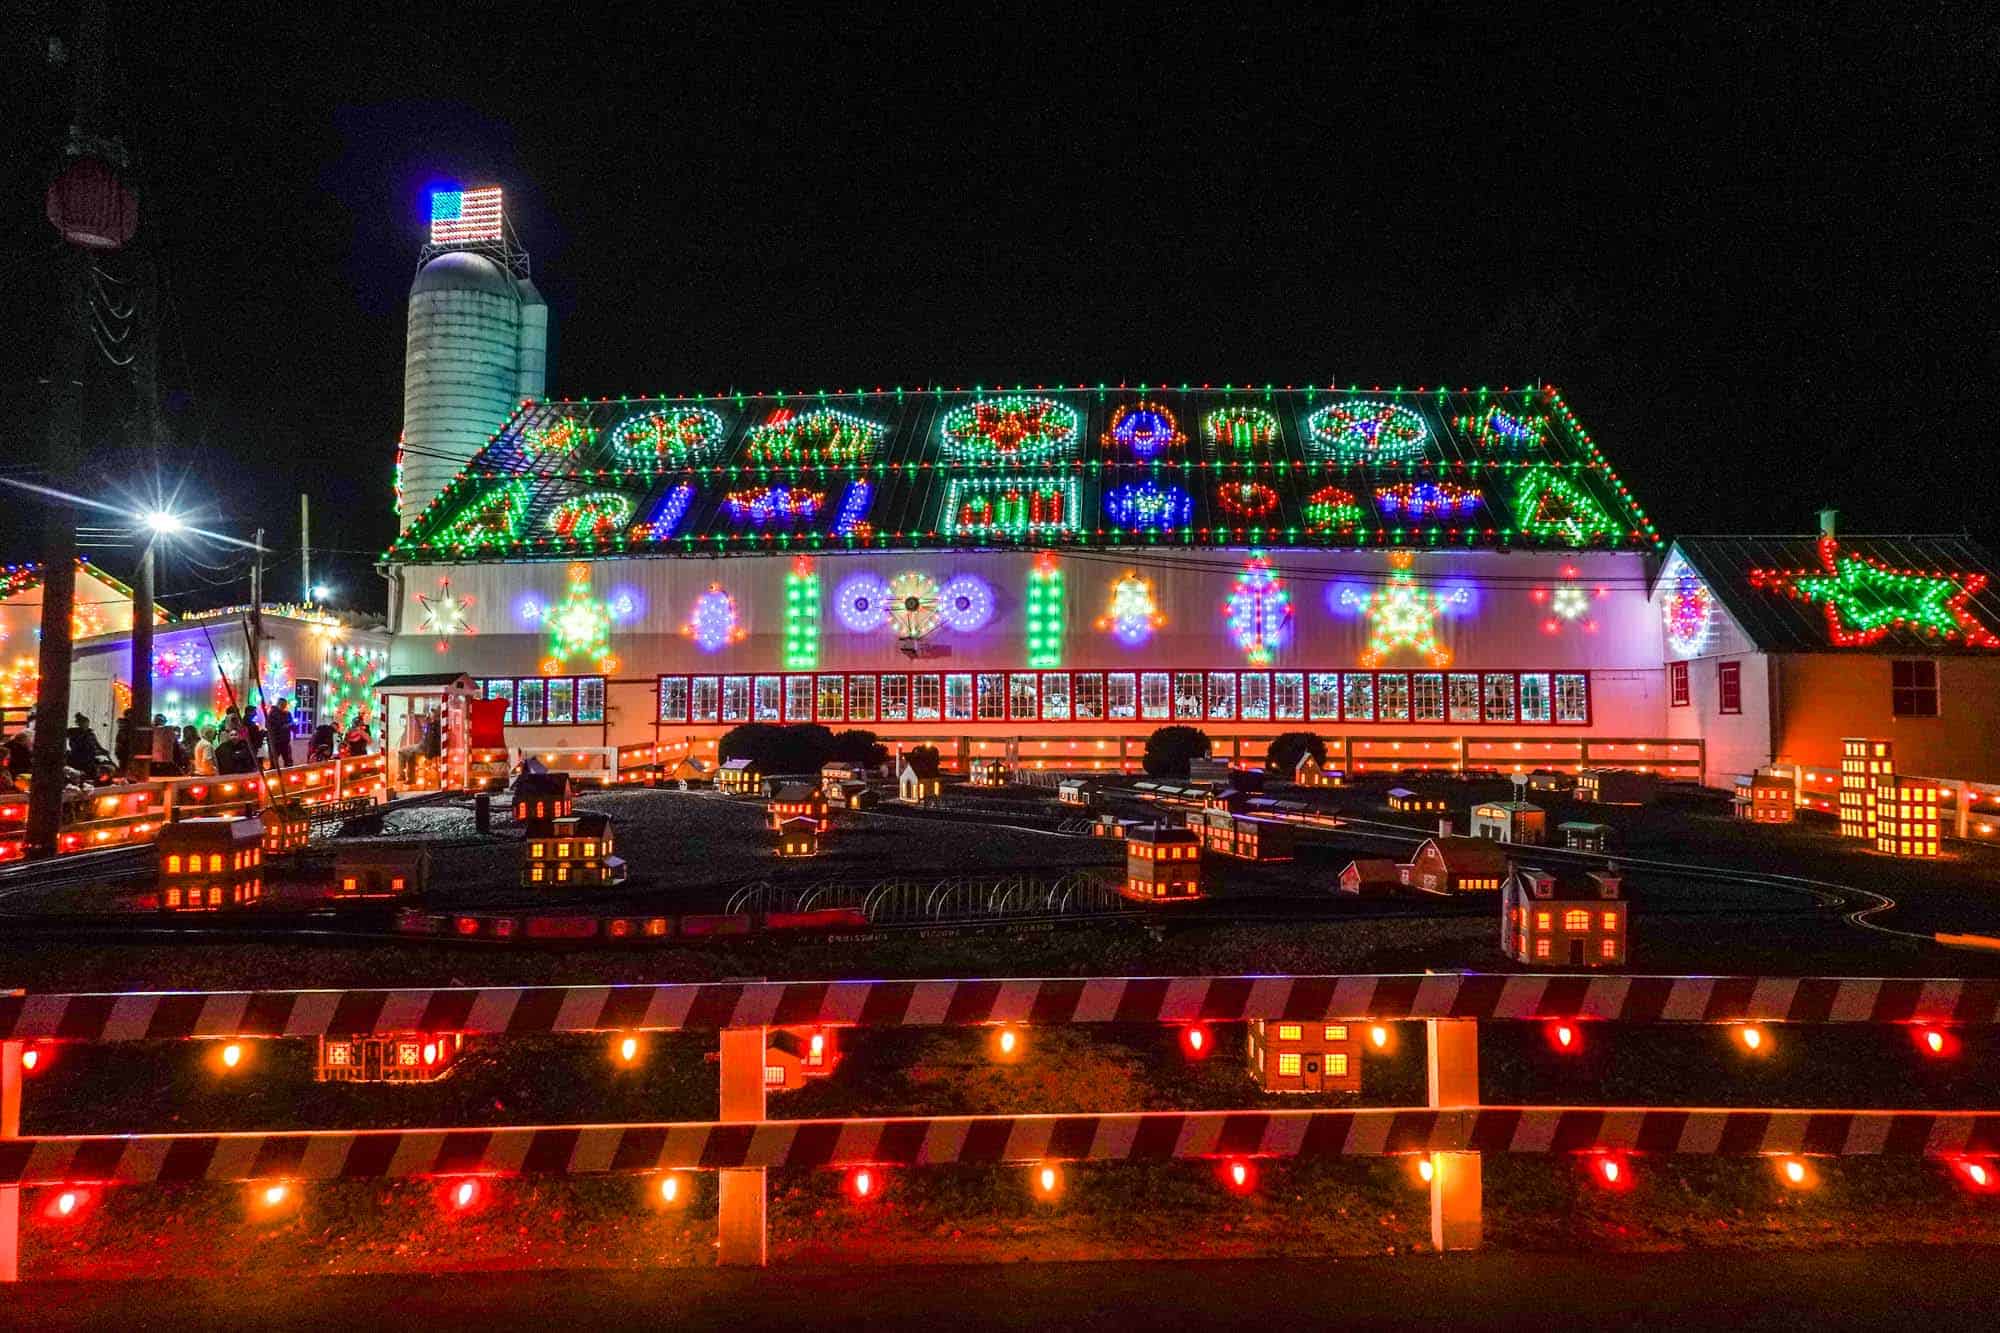 Barn at Koziar's Christmas Village decked out in lights with model railway in front